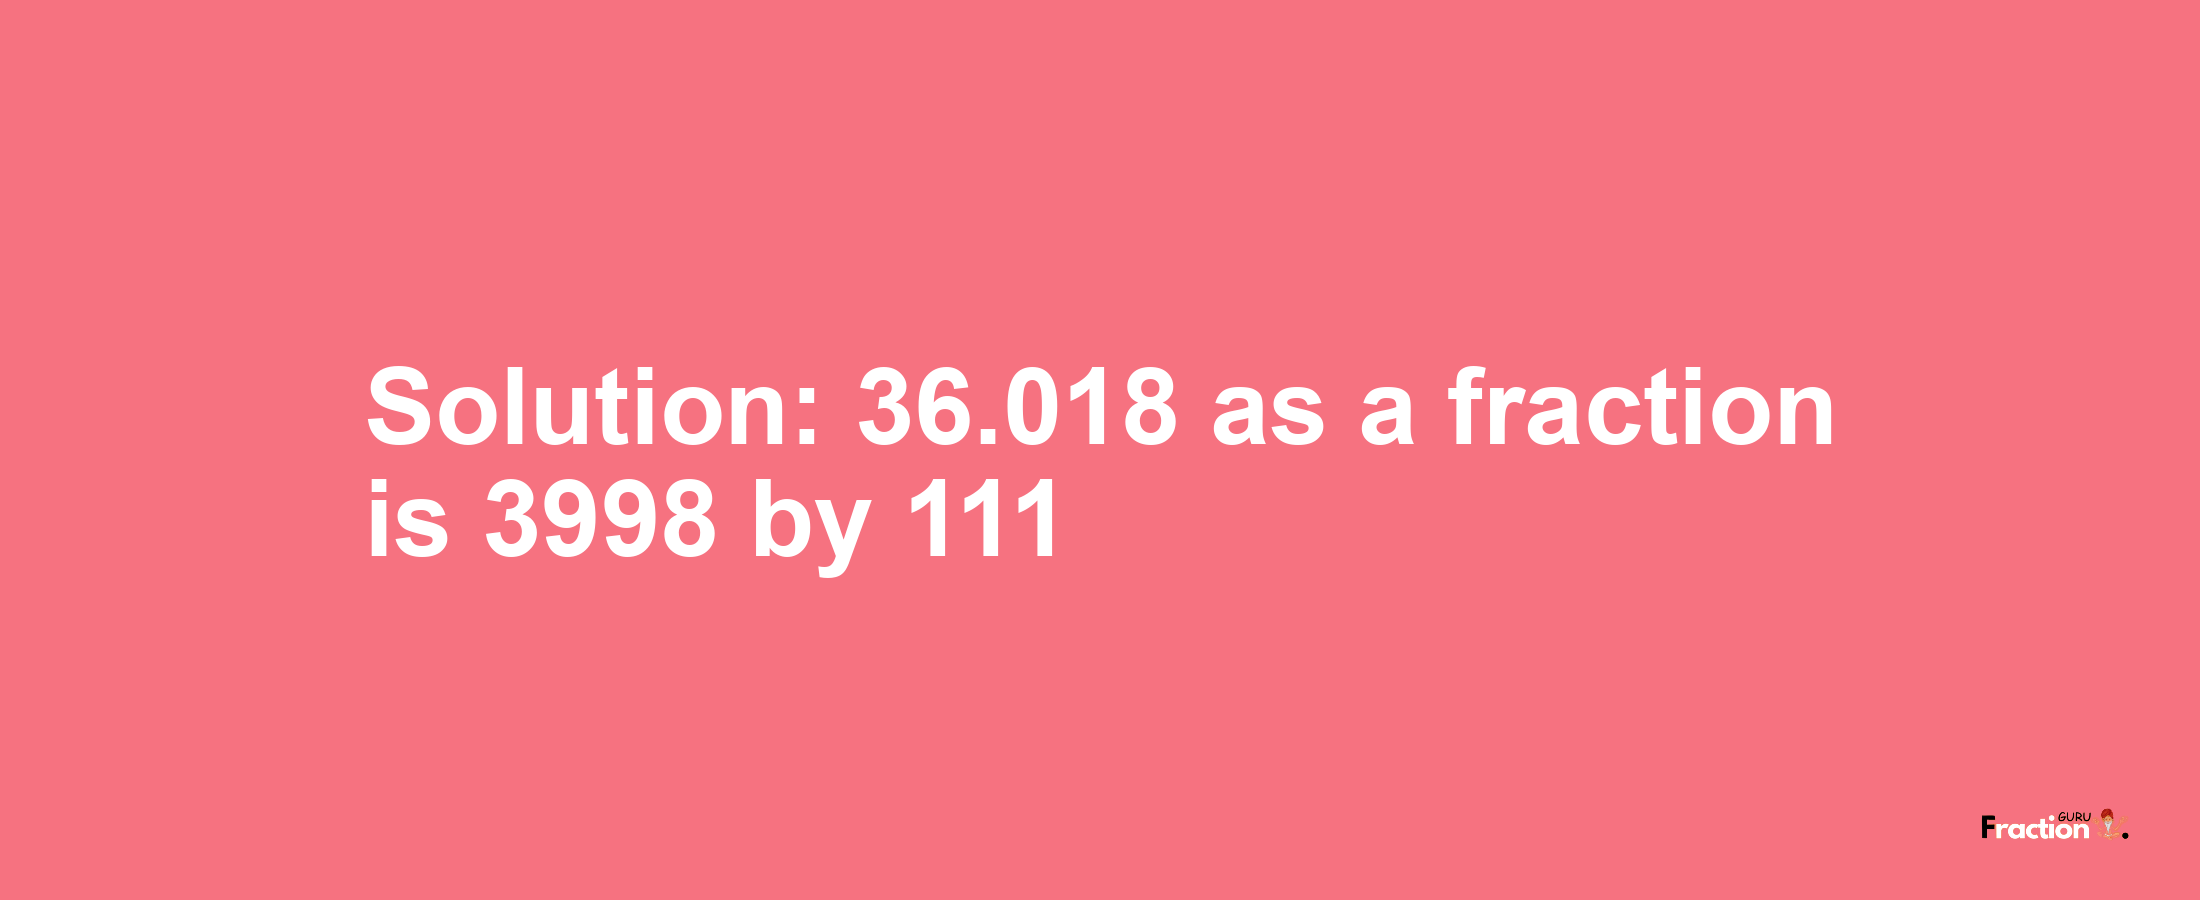 Solution:36.018 as a fraction is 3998/111